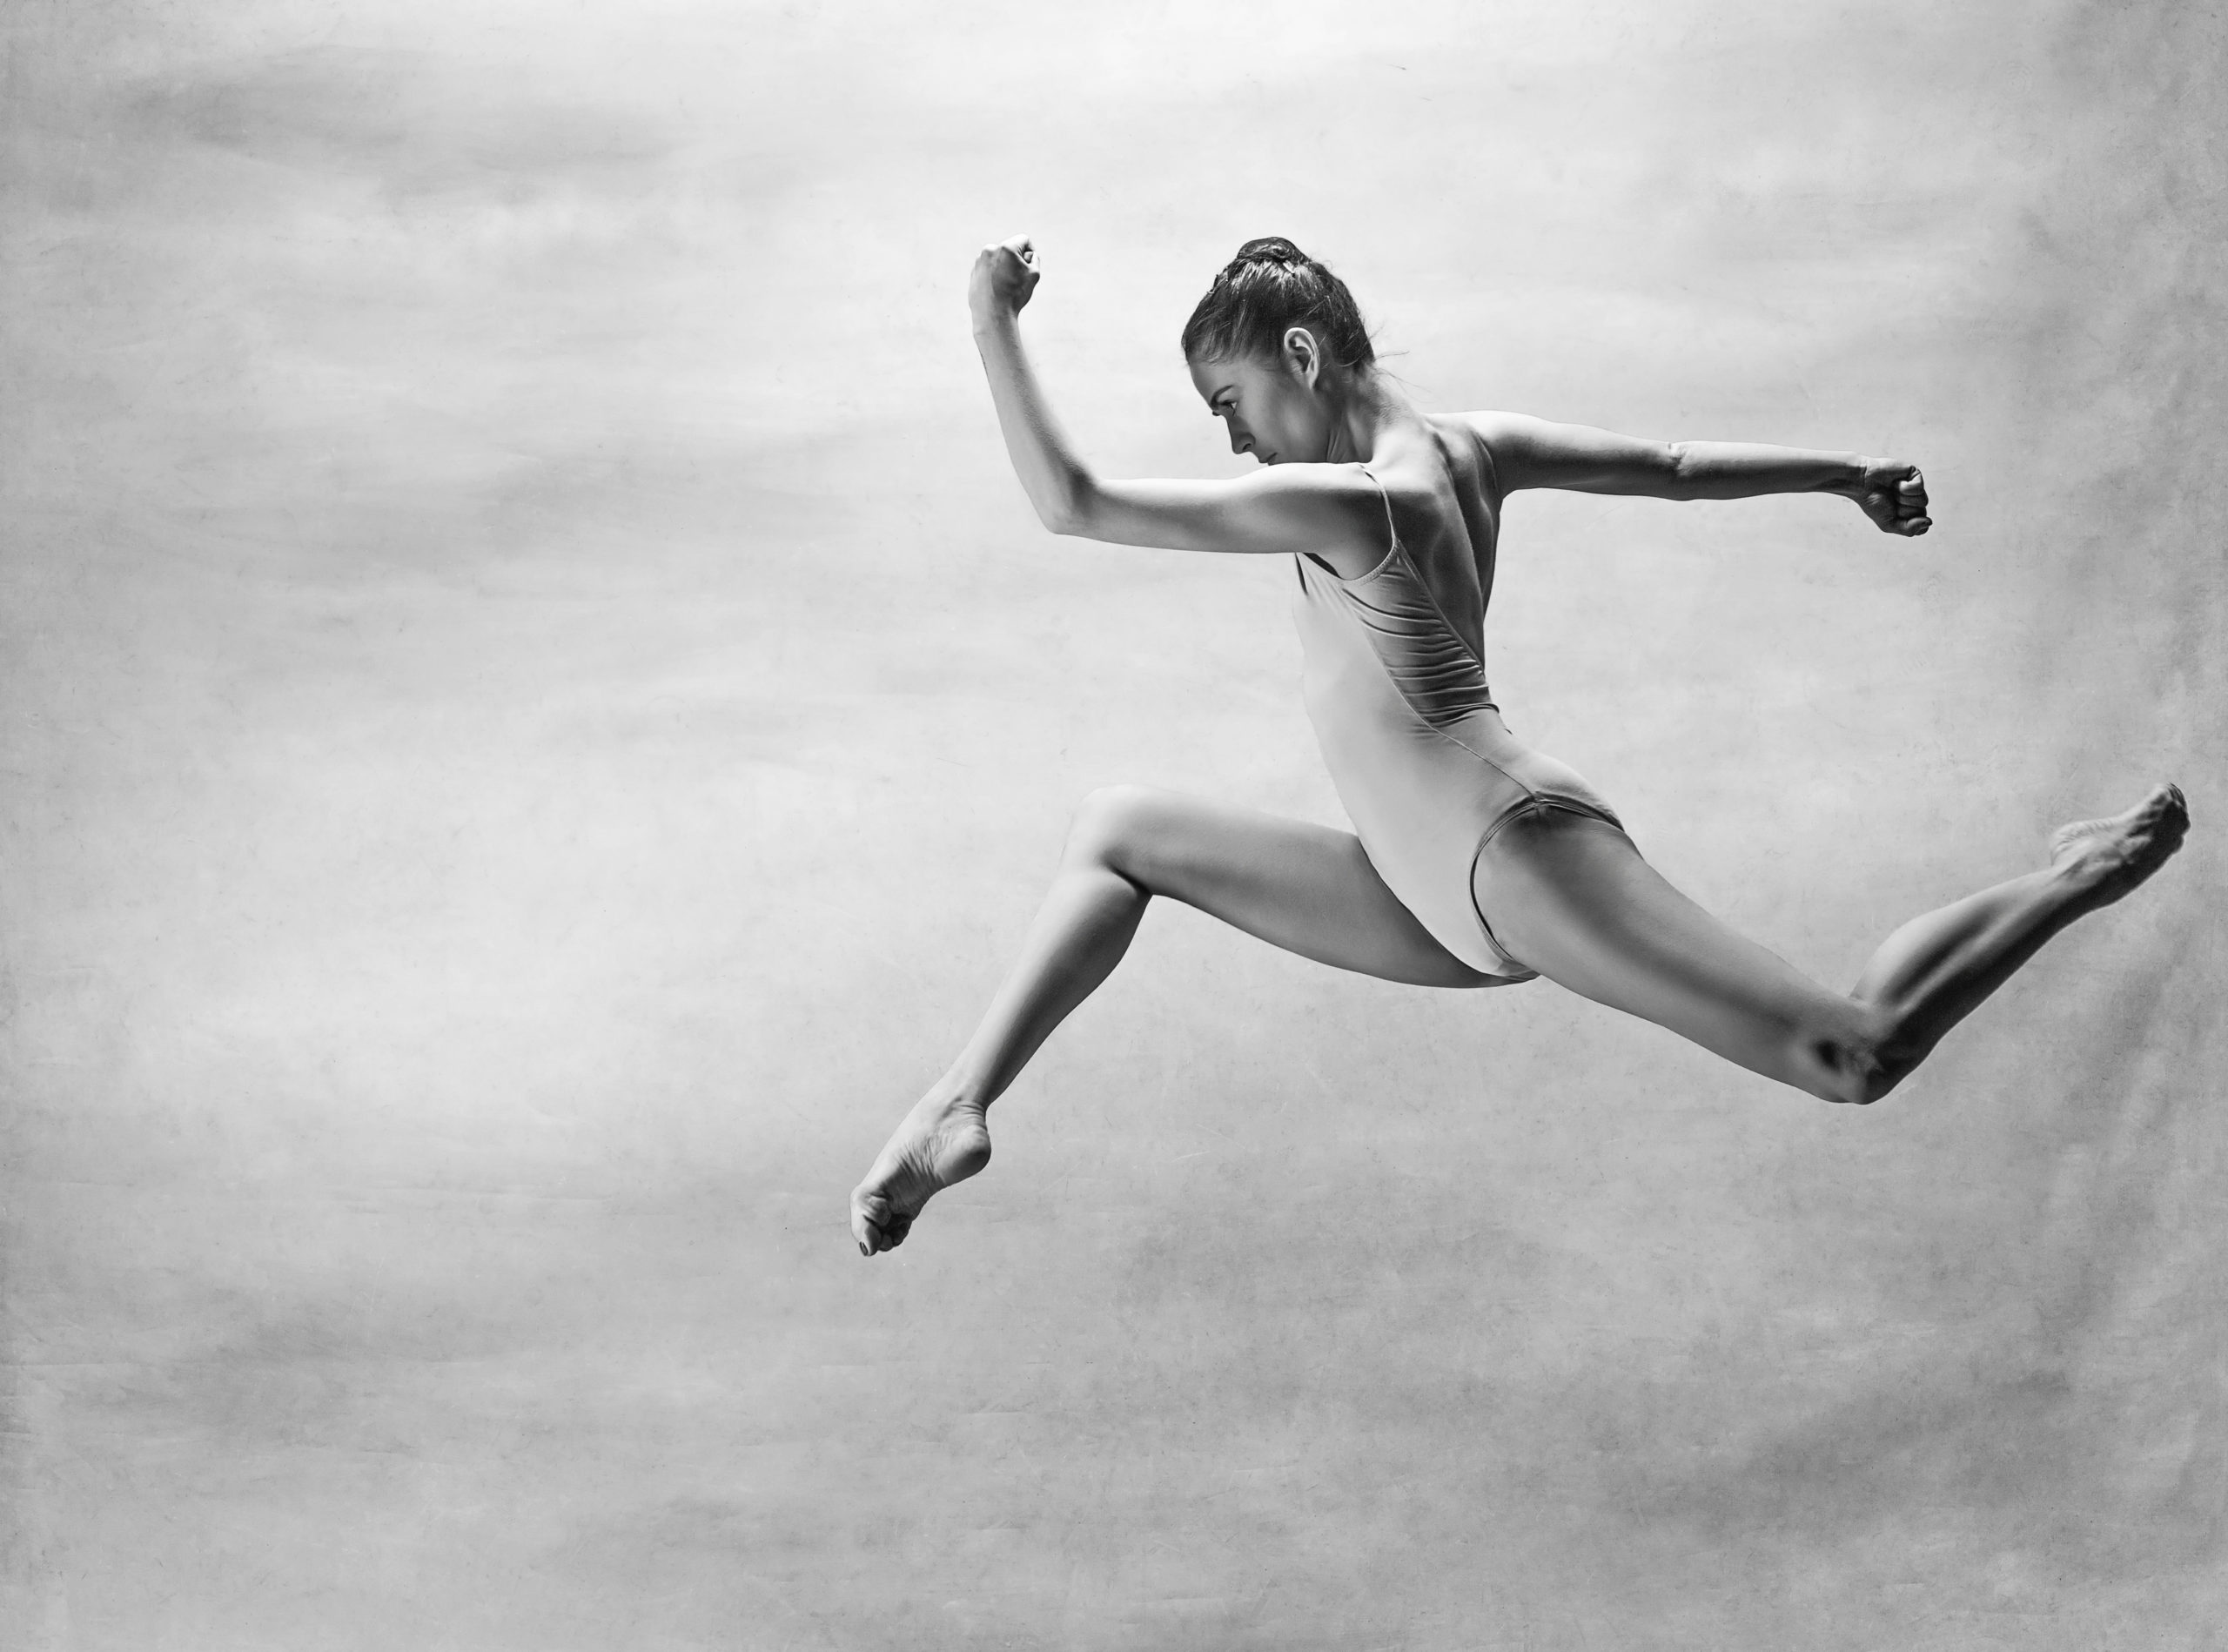 A female ballet dancer jumps up in a leap with both knees bent, with her hands in fists and her left arm crooked in front of her face. She looks determined and dances in front of a studio backdrop in this black and white image.